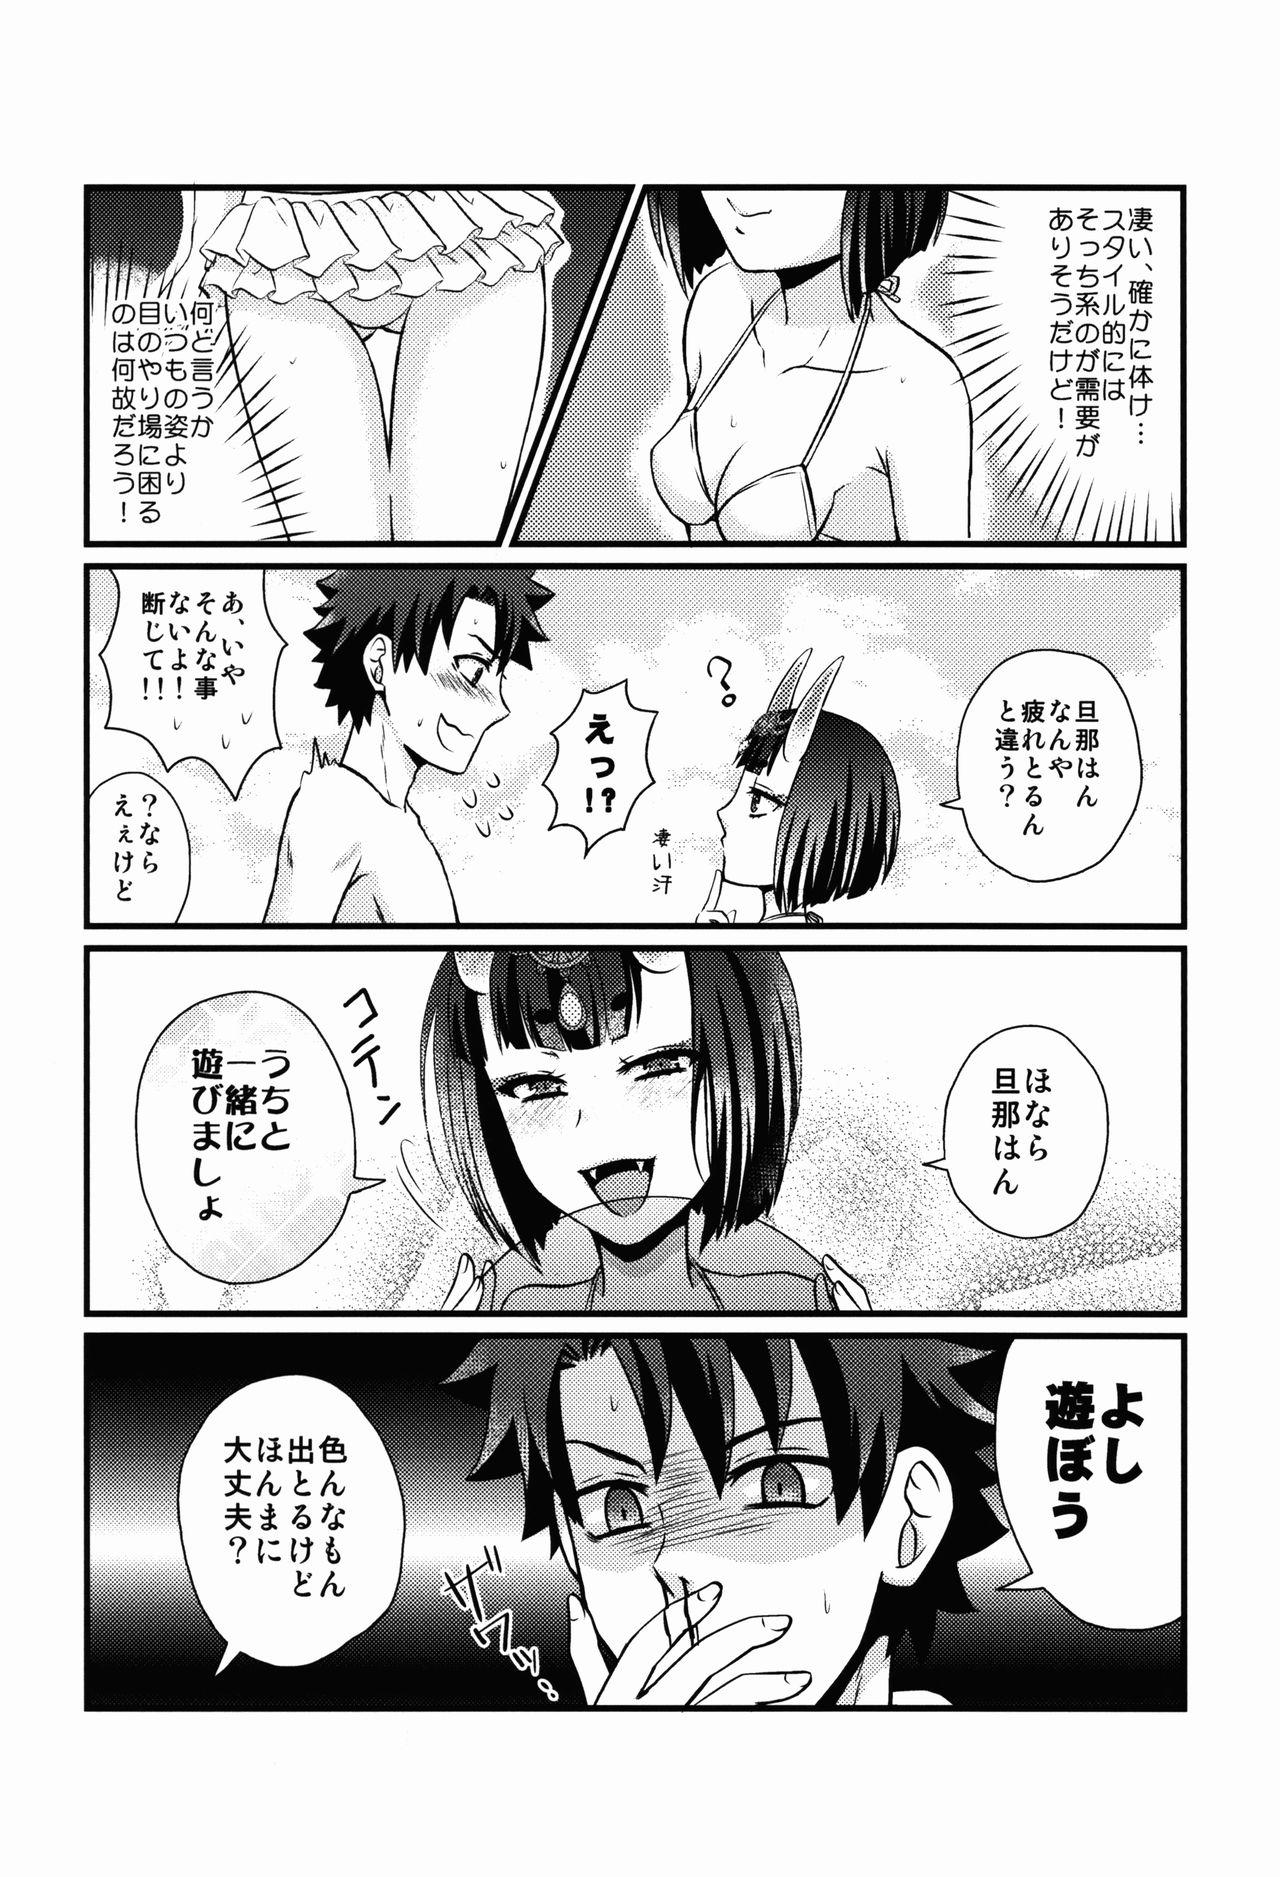 Head COMET:10 - Fate grand order Gay Averagedick - Page 6